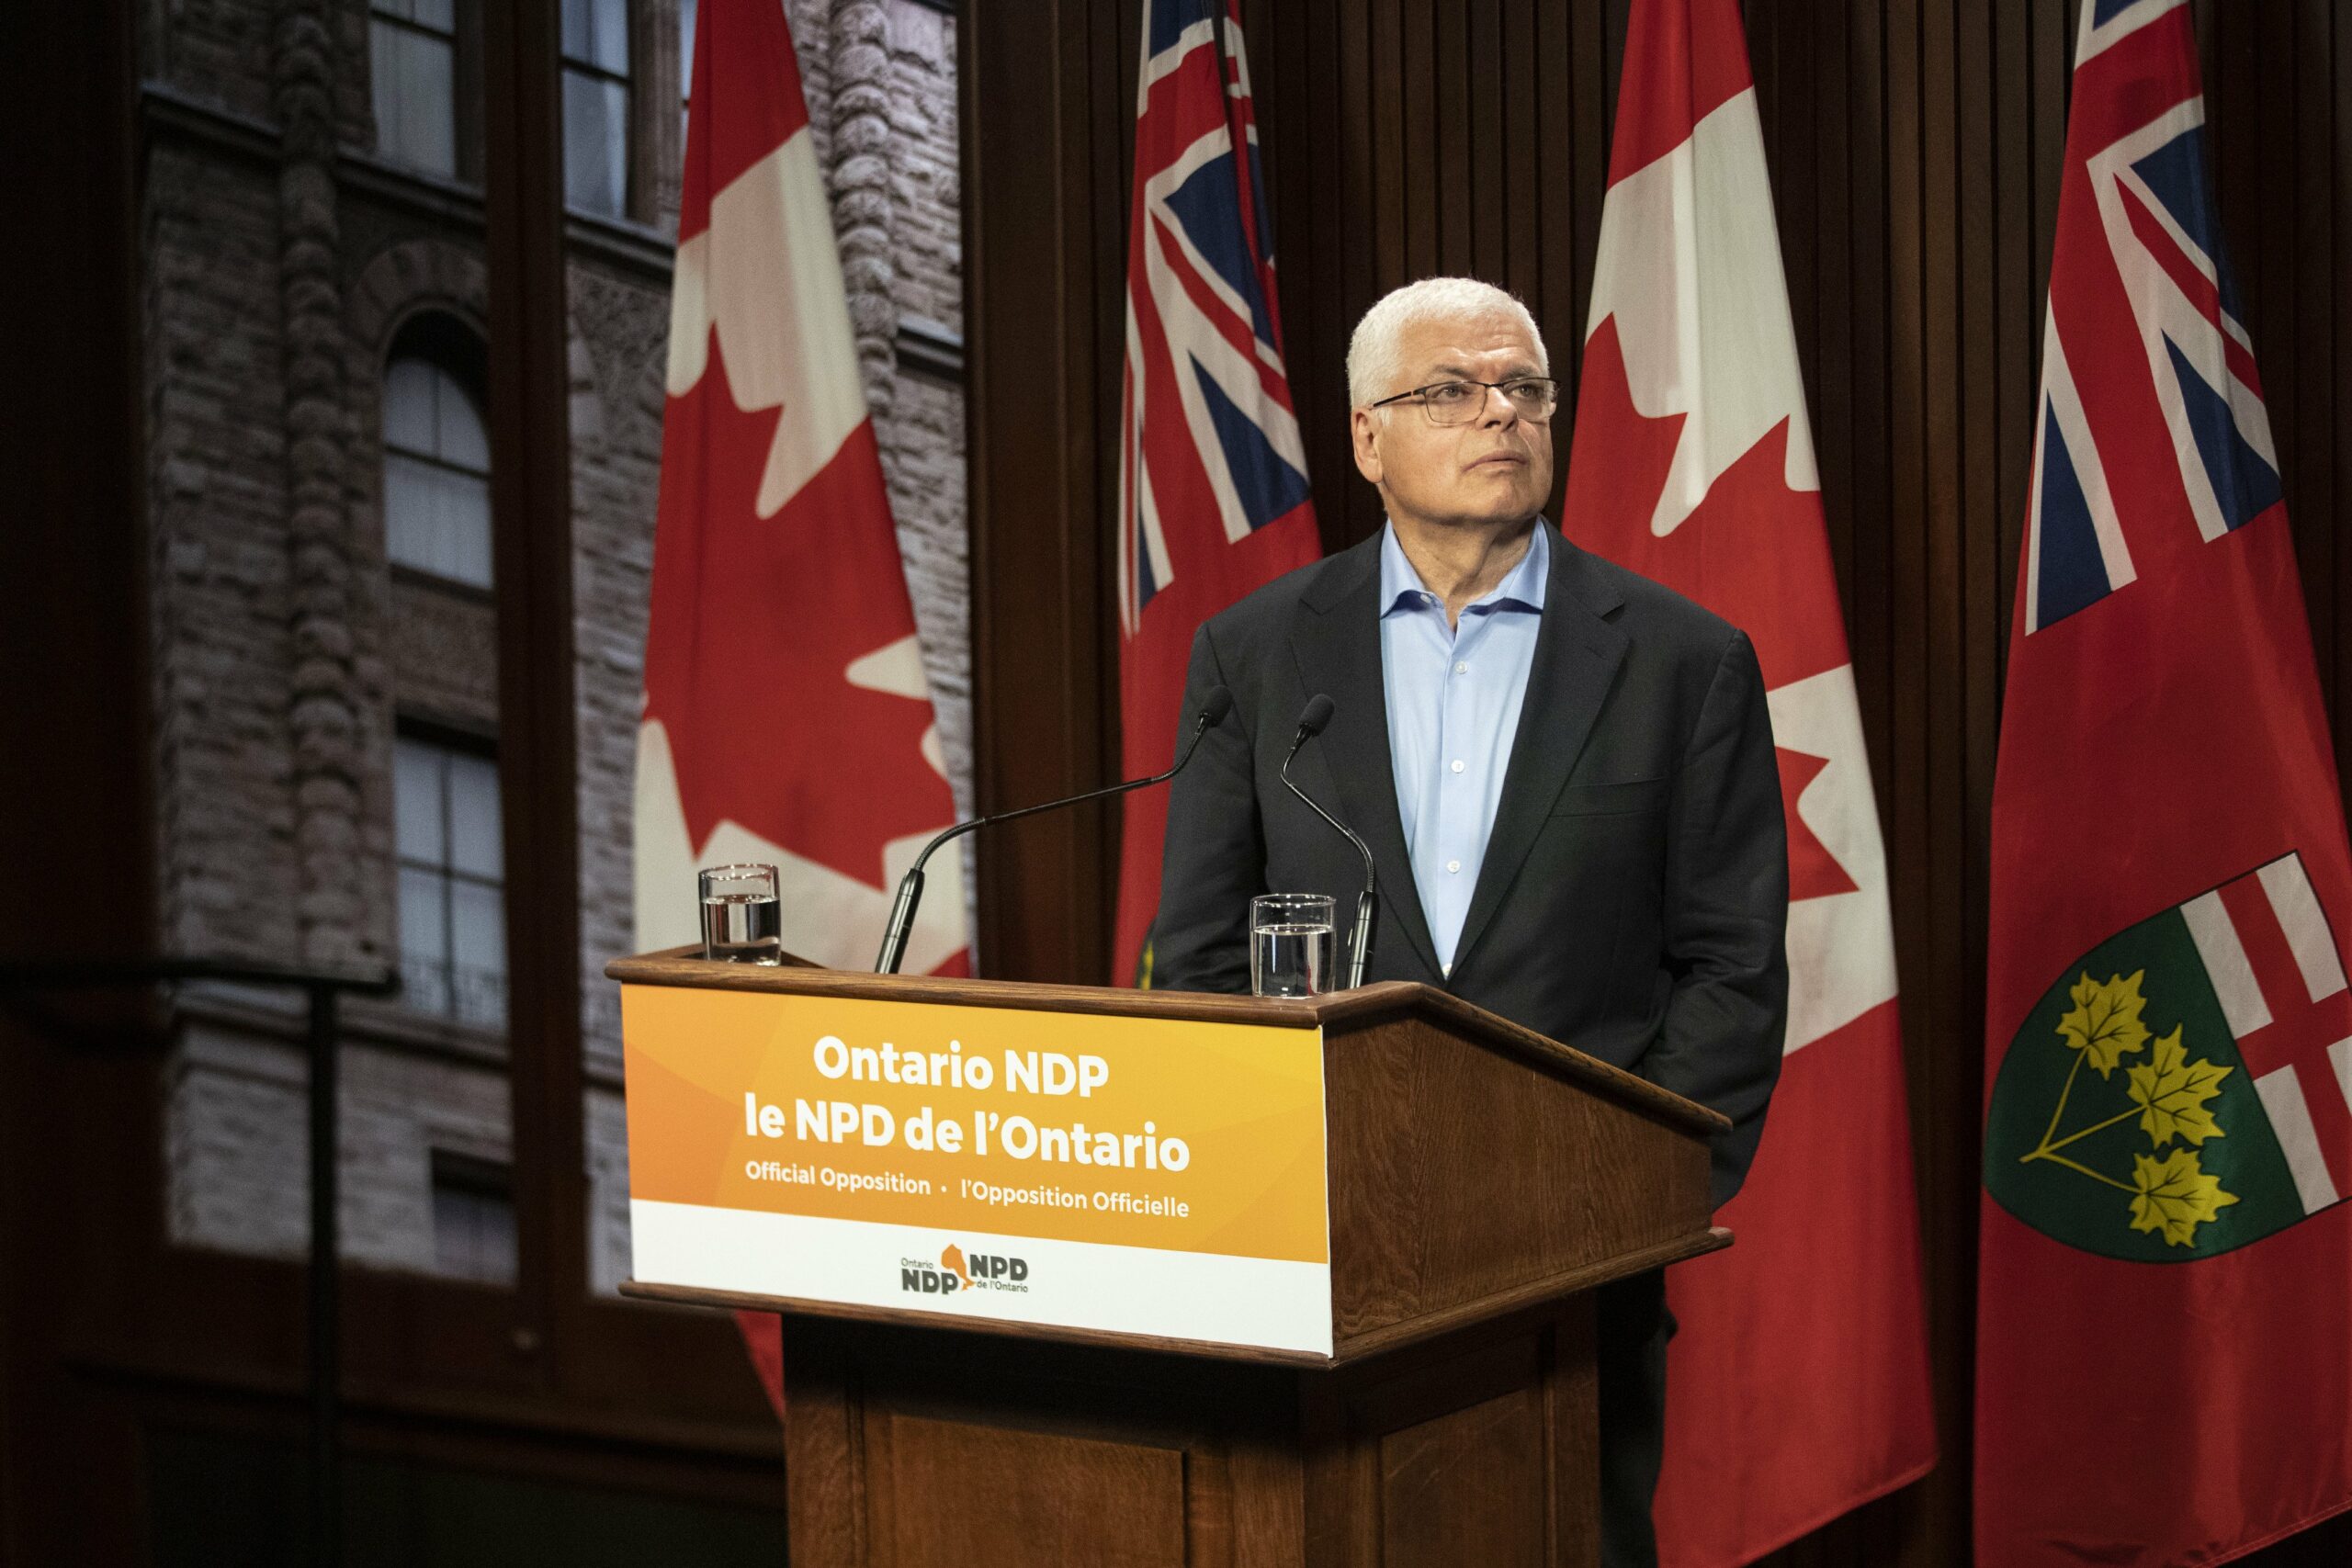 Ontario's transitioning NDP plants its flags as Ford's government 2.0 gets moving